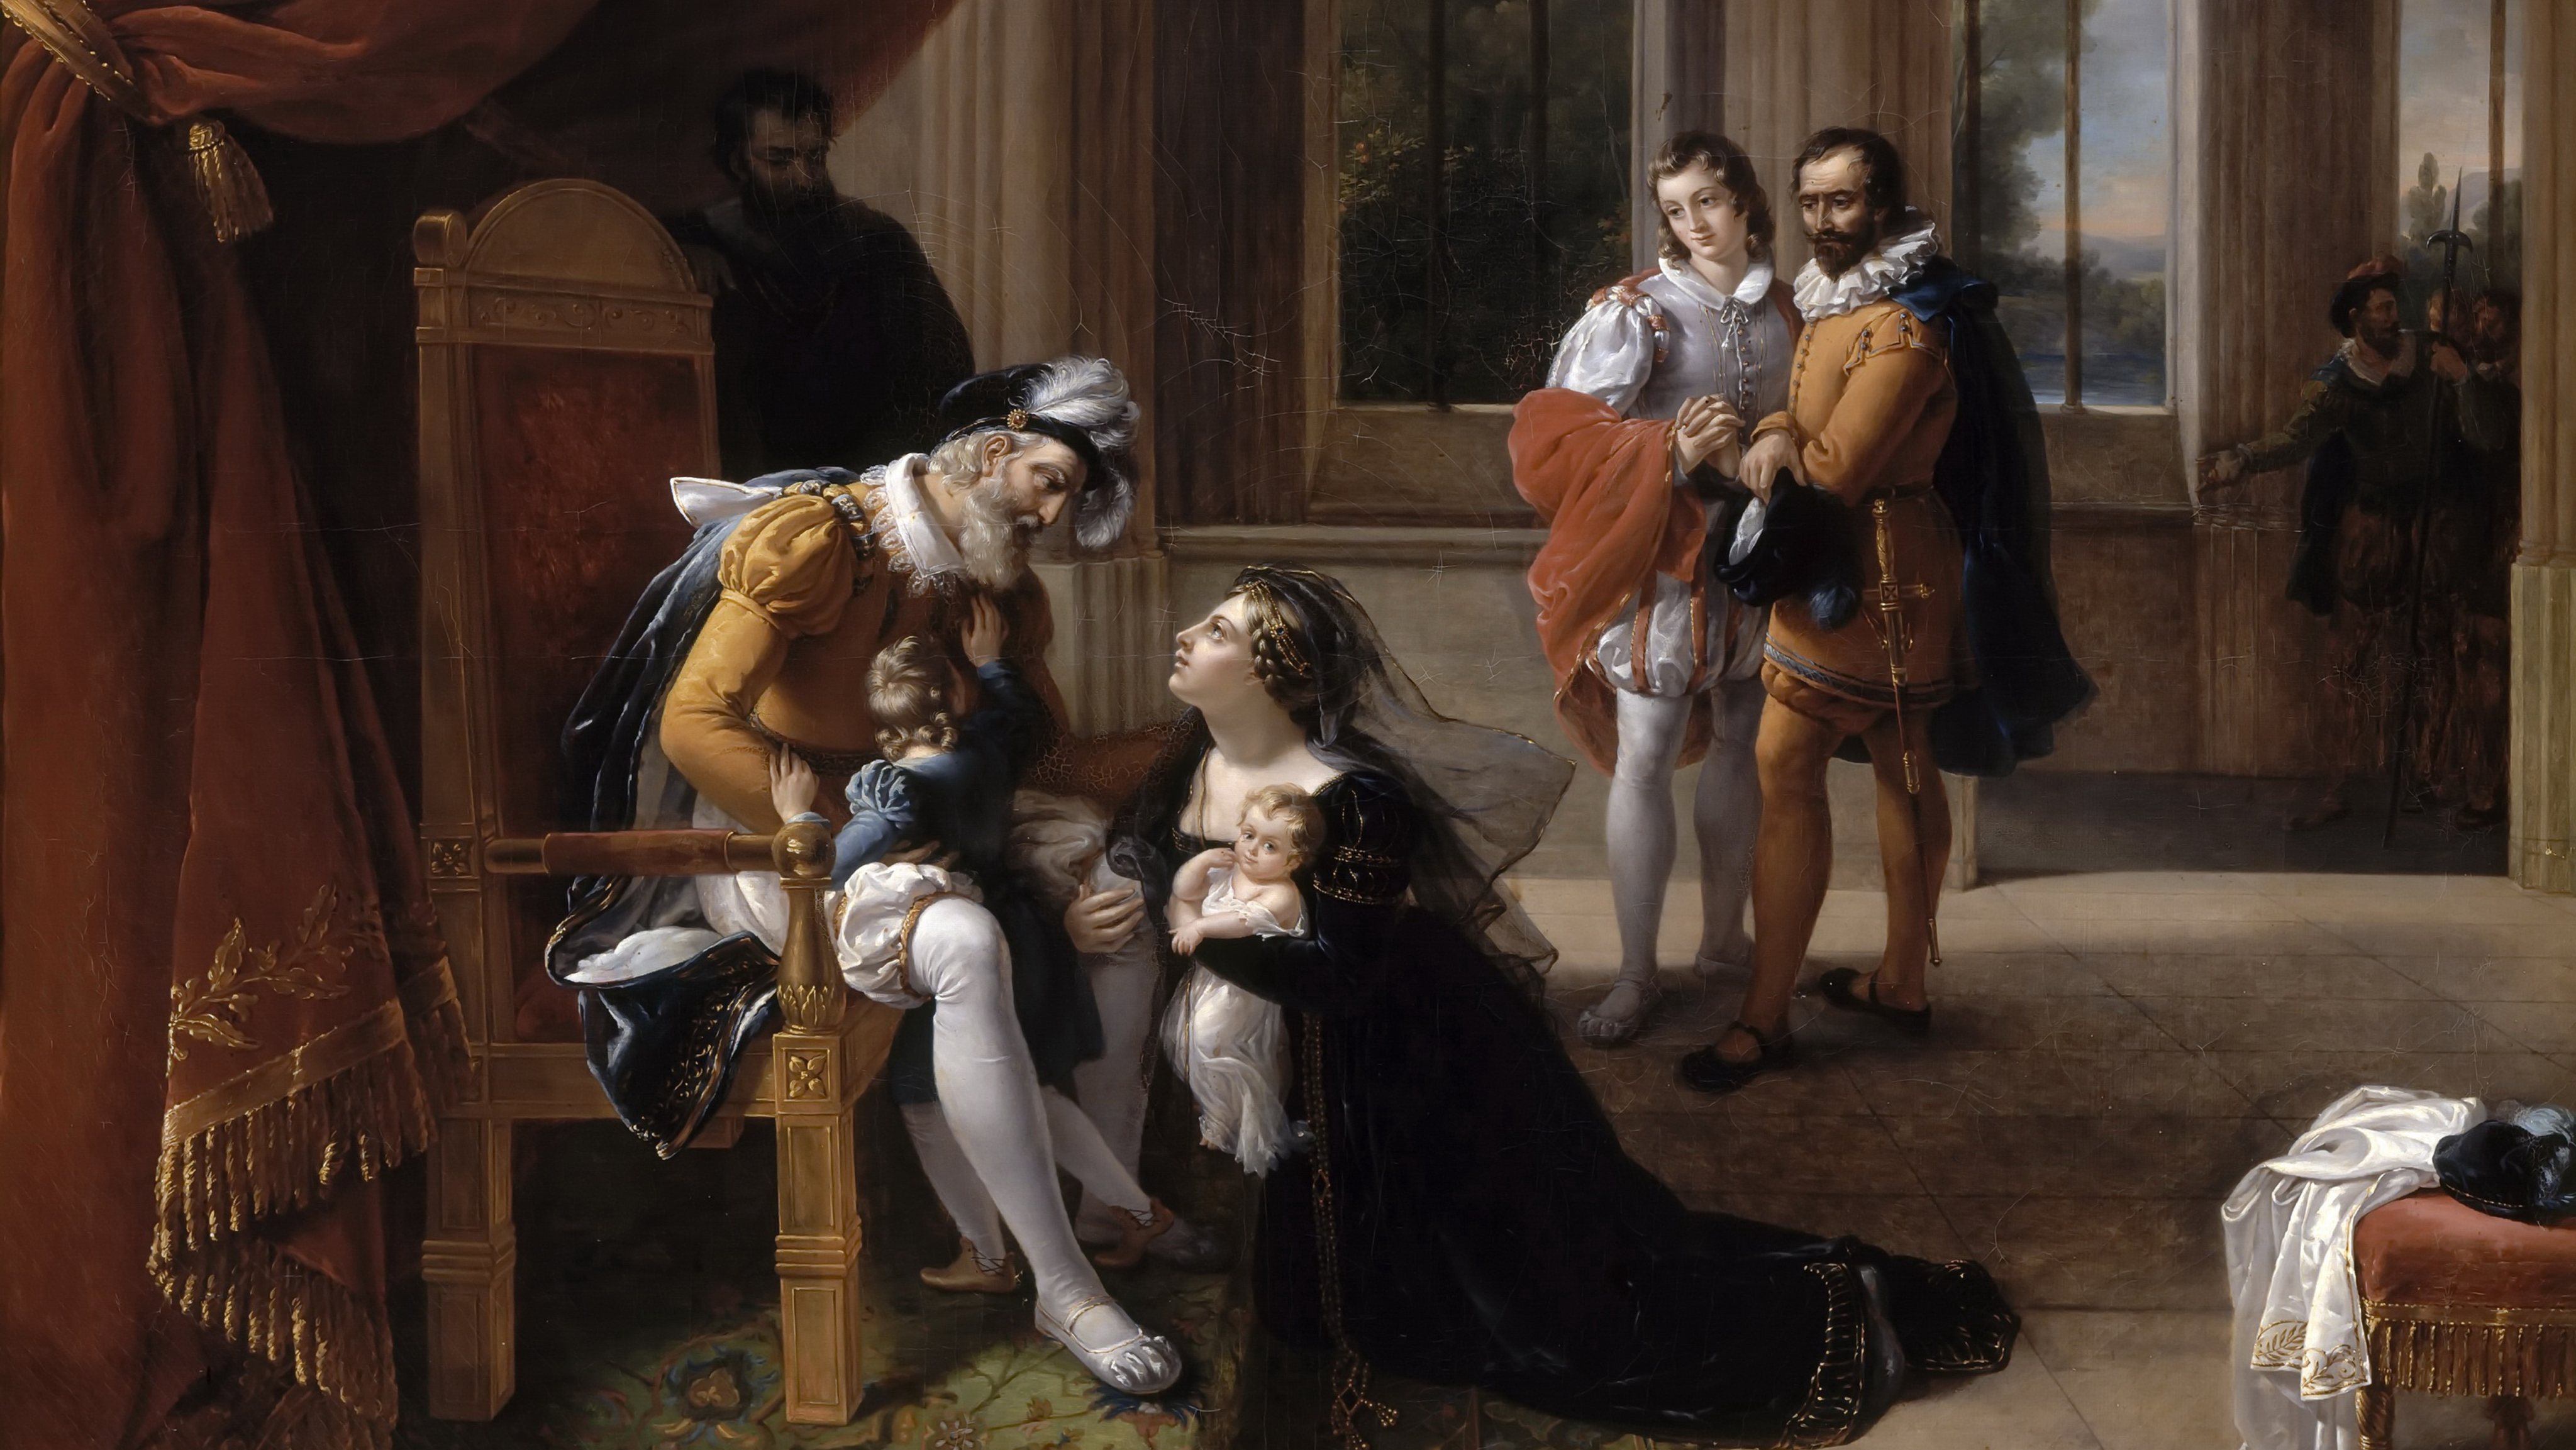 Inês de Castro with Her Children at the Feet of Afonso IV, King of Portugal, 1335. Artist: Servières, Eugénie (1786-after 1824)